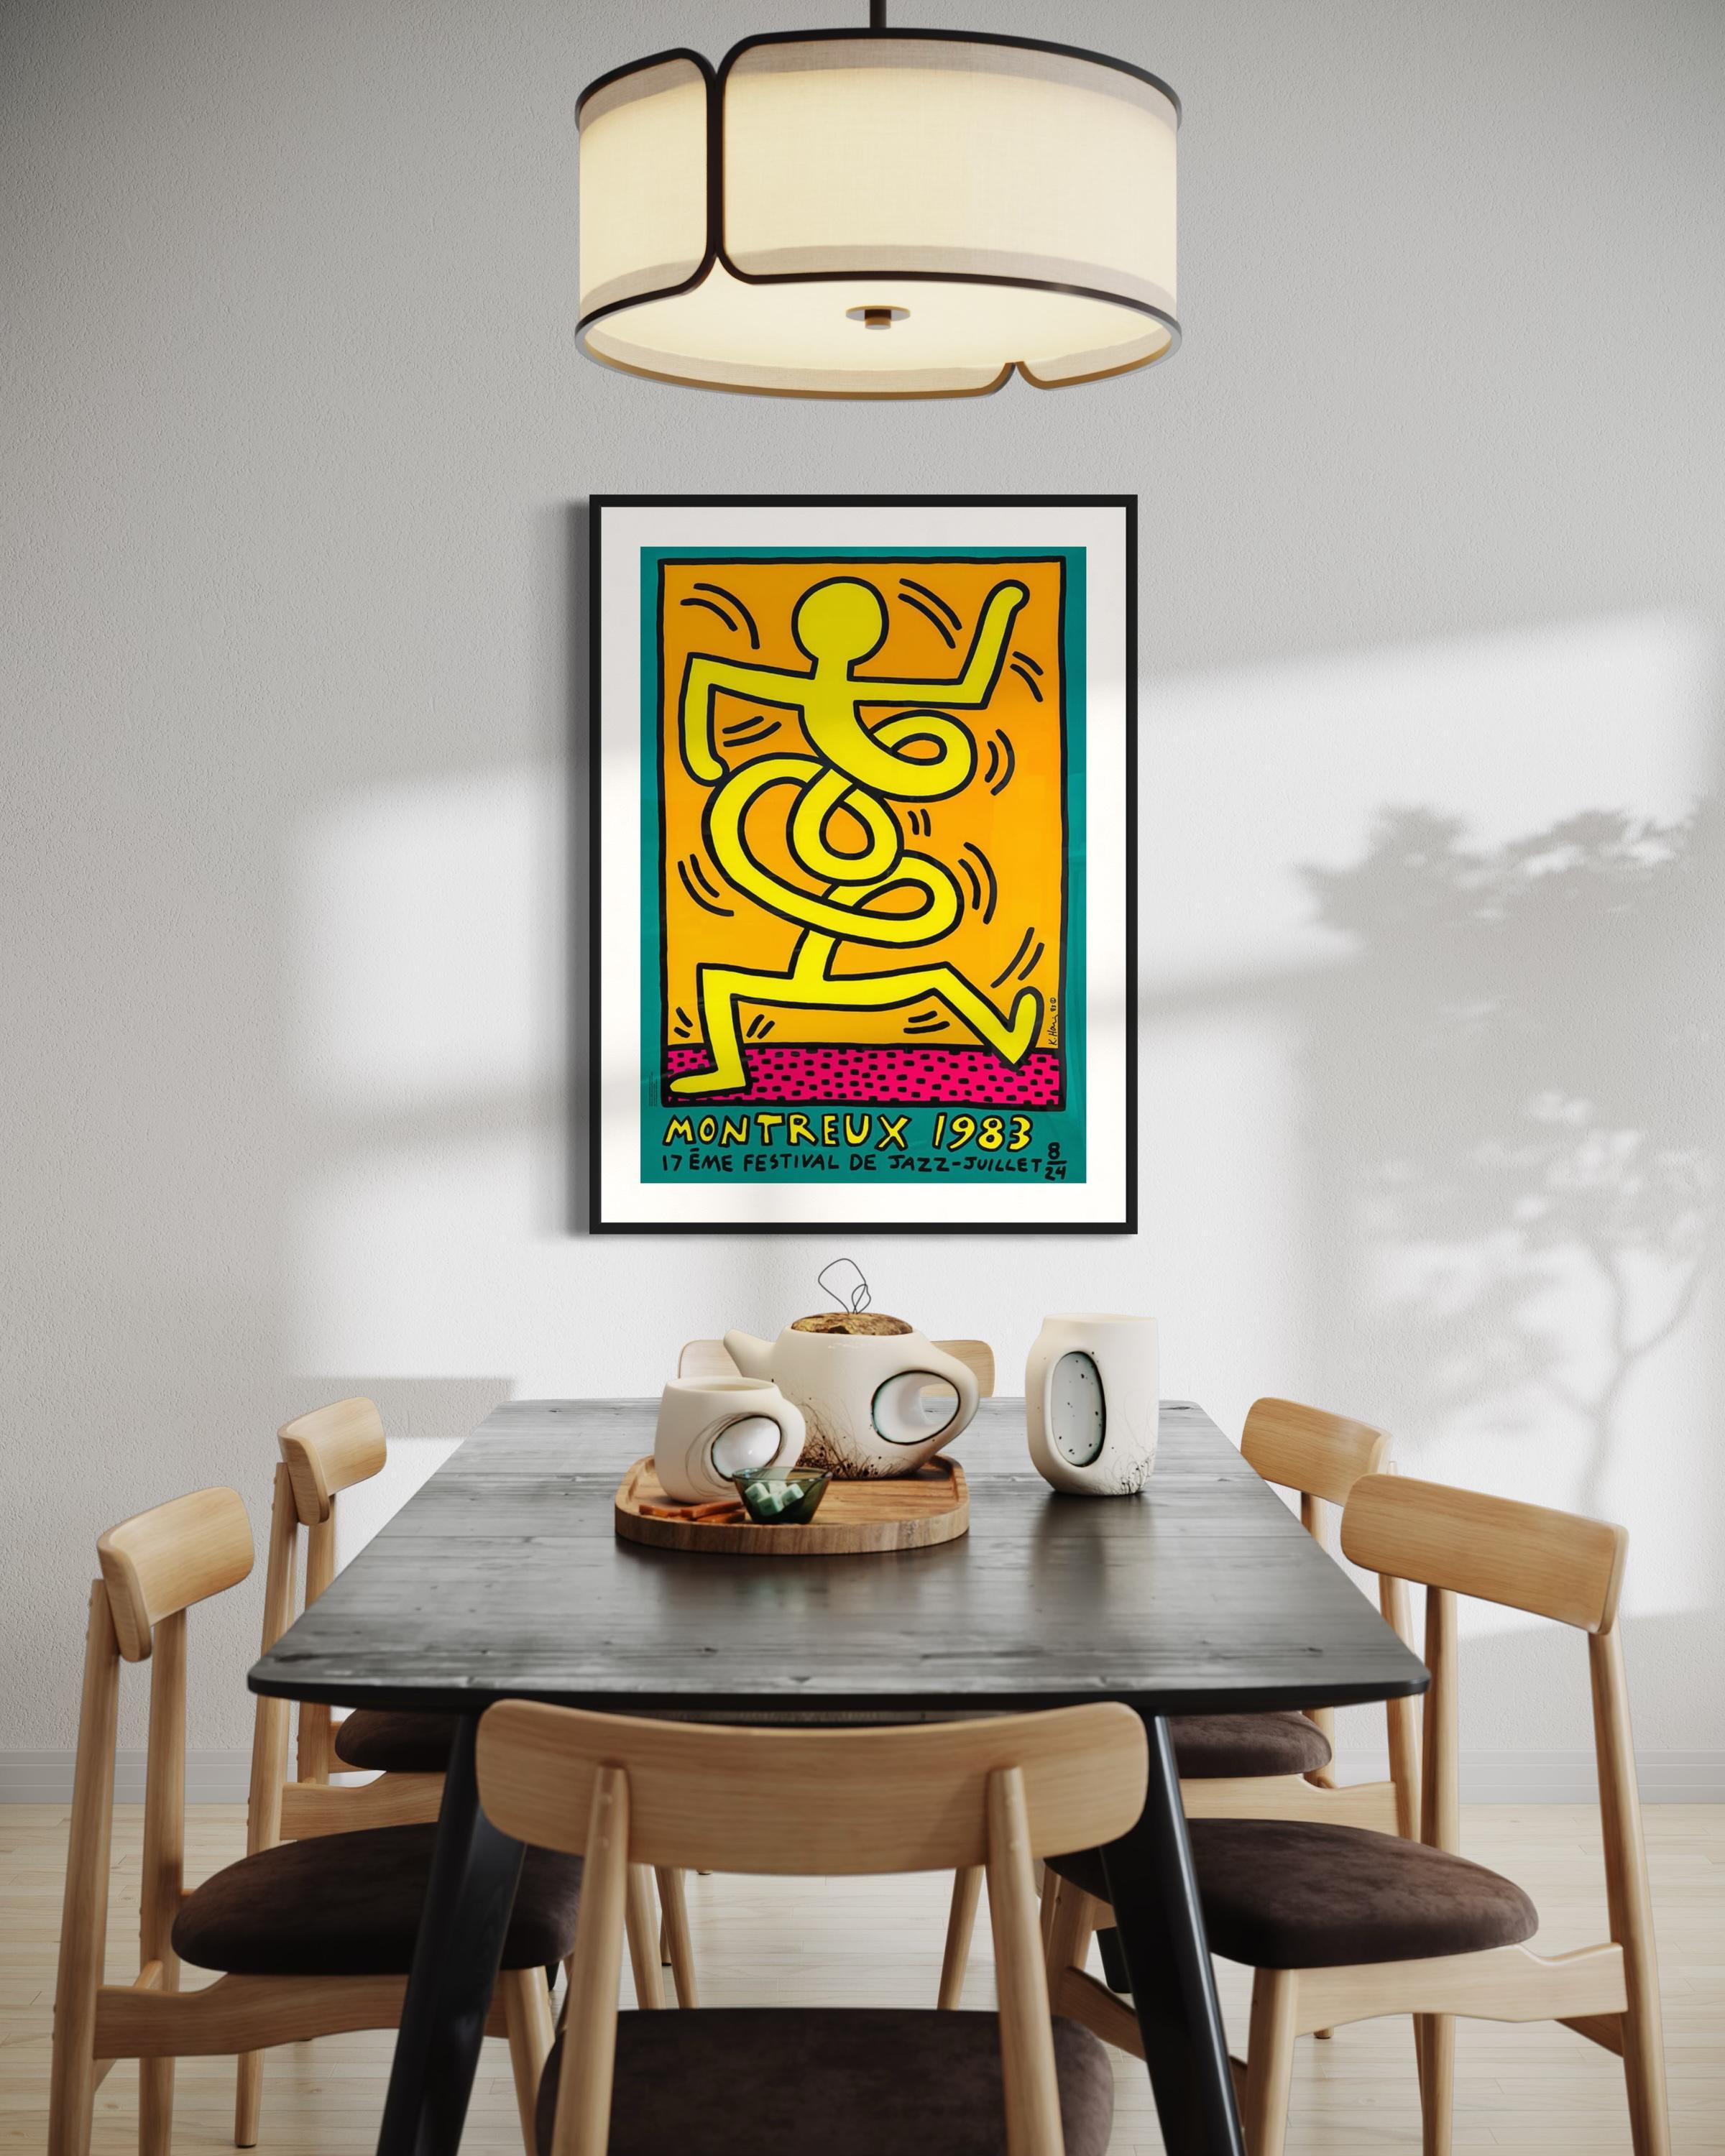 Montreux Jazz Festival 1983 (Green) - Pop Art Print by Keith Haring